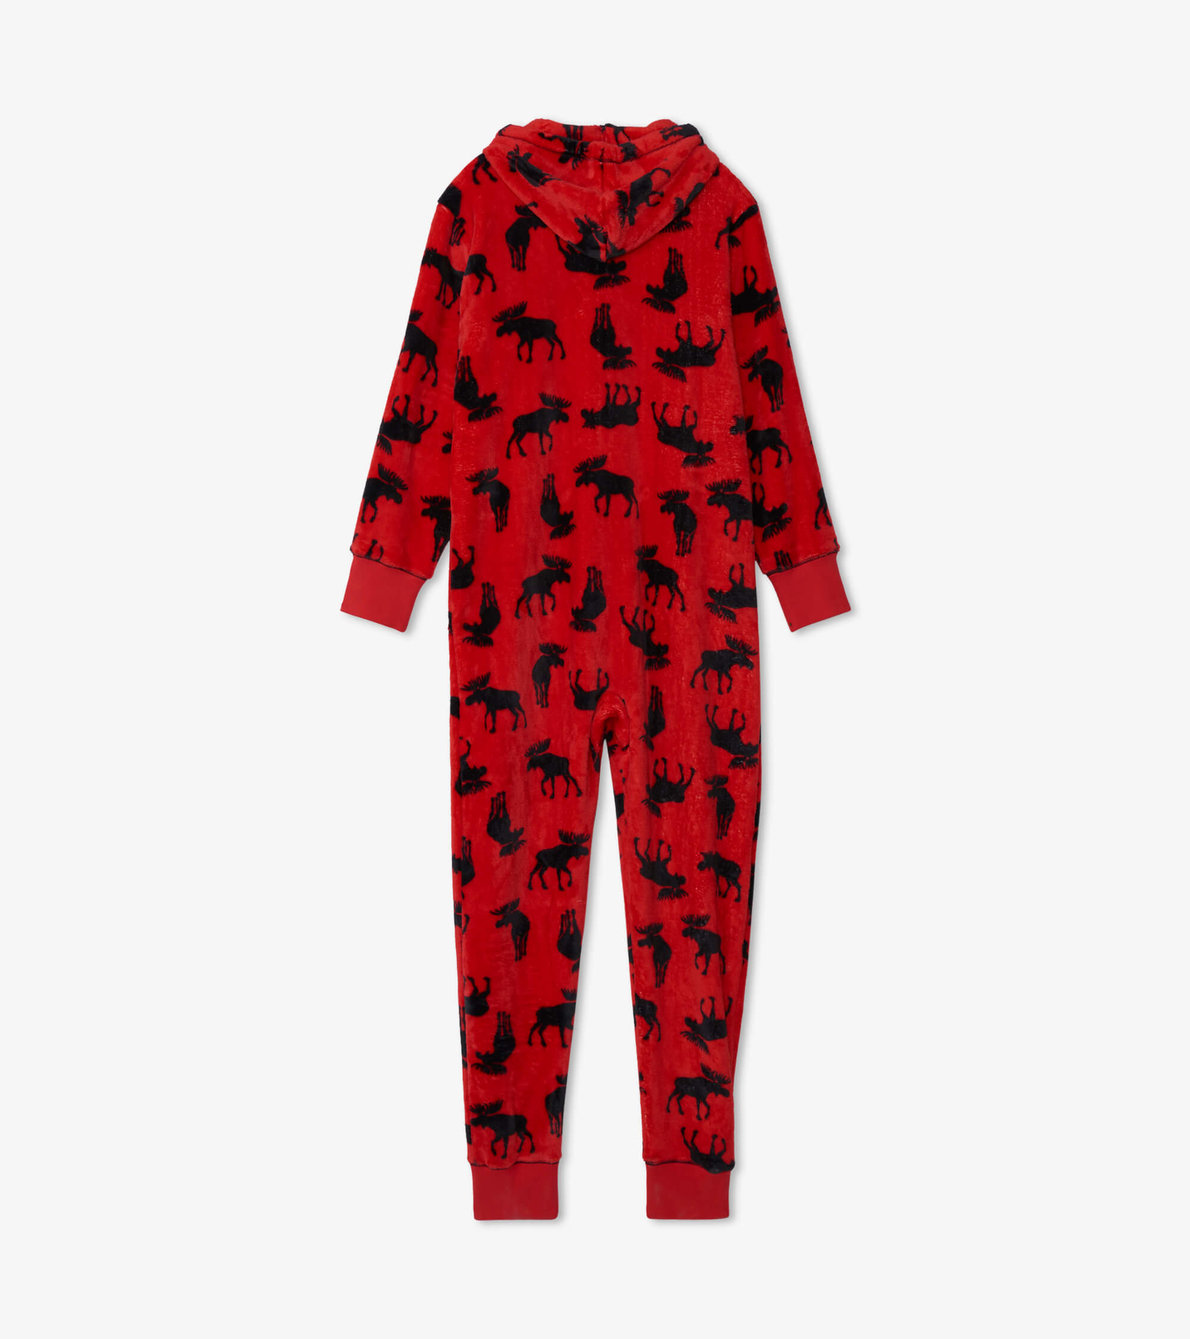 View larger image of Moose on Red Adult Hooded Fleece Jumpsuit